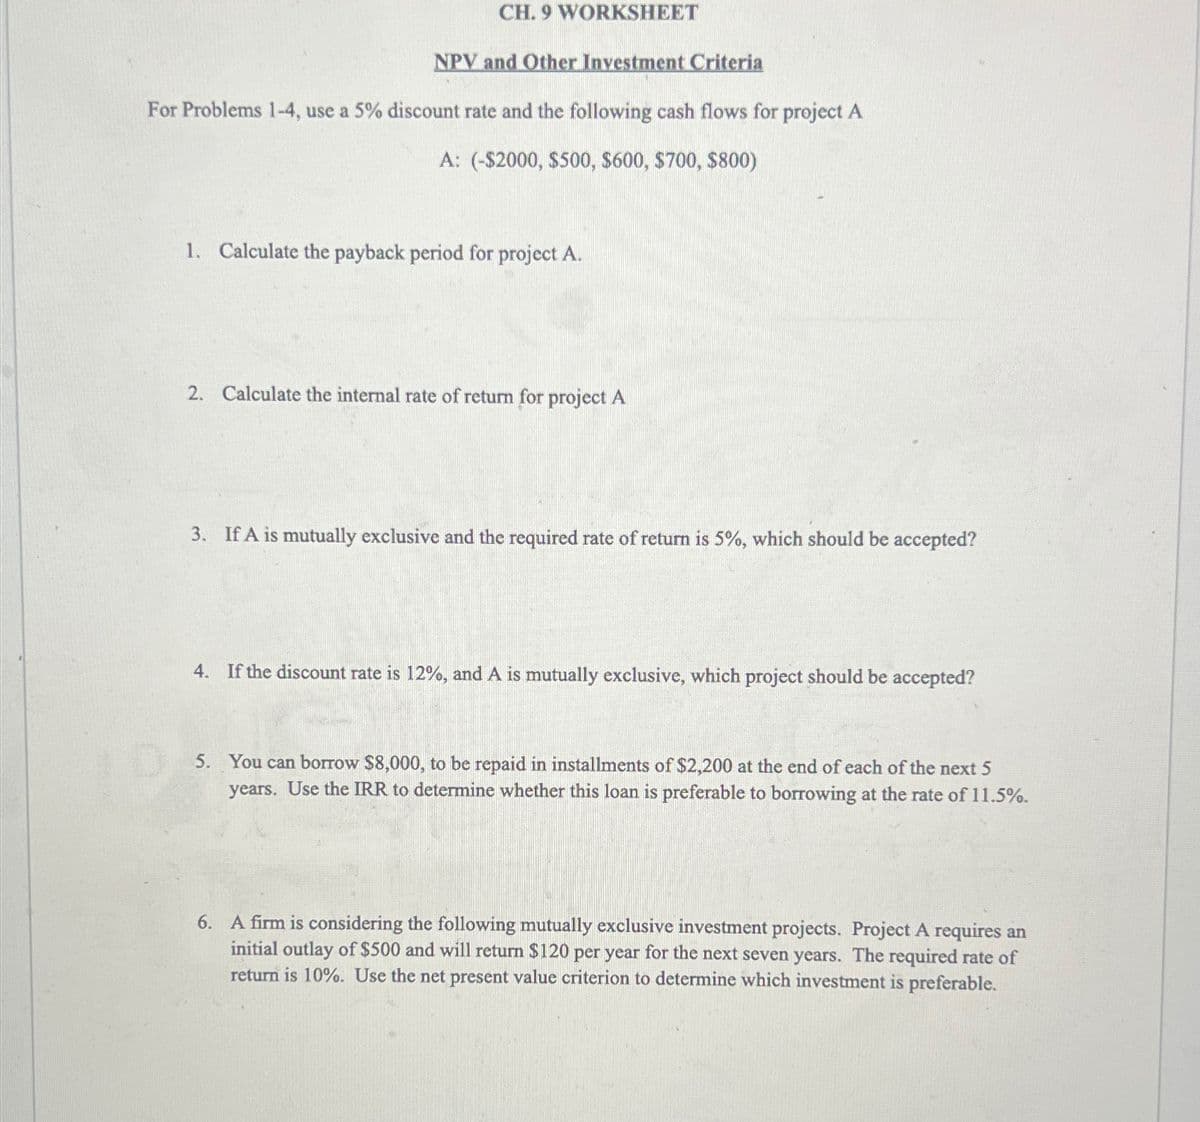 CH. 9 WORKSHEET
NPV and Other Investment Criteria
For Problems 1-4, use a 5% discount rate and the following cash flows for project A
A: (-$2000, $500, $600, $700, $800)
1. Calculate the payback period for project A.
2. Calculate the internal rate of return for project A
3. If A is mutually exclusive and the required rate of return is 5%, which should be accepted?
4. If the discount rate is 12%, and A is mutually exclusive, which project should be accepted?
5. You can borrow $8,000, to be repaid in installments of $2,200 at the end of each of the next 5
years. Use the IRR to determine whether this loan is preferable to borrowing at the rate of 11.5%.
6. A firm is considering the following mutually exclusive investment projects. Project A requires an
initial outlay of $500 and will return $120 per year for the next seven years. The required rate of
return is 10%. Use the net present value criterion to determine which investment is preferable.